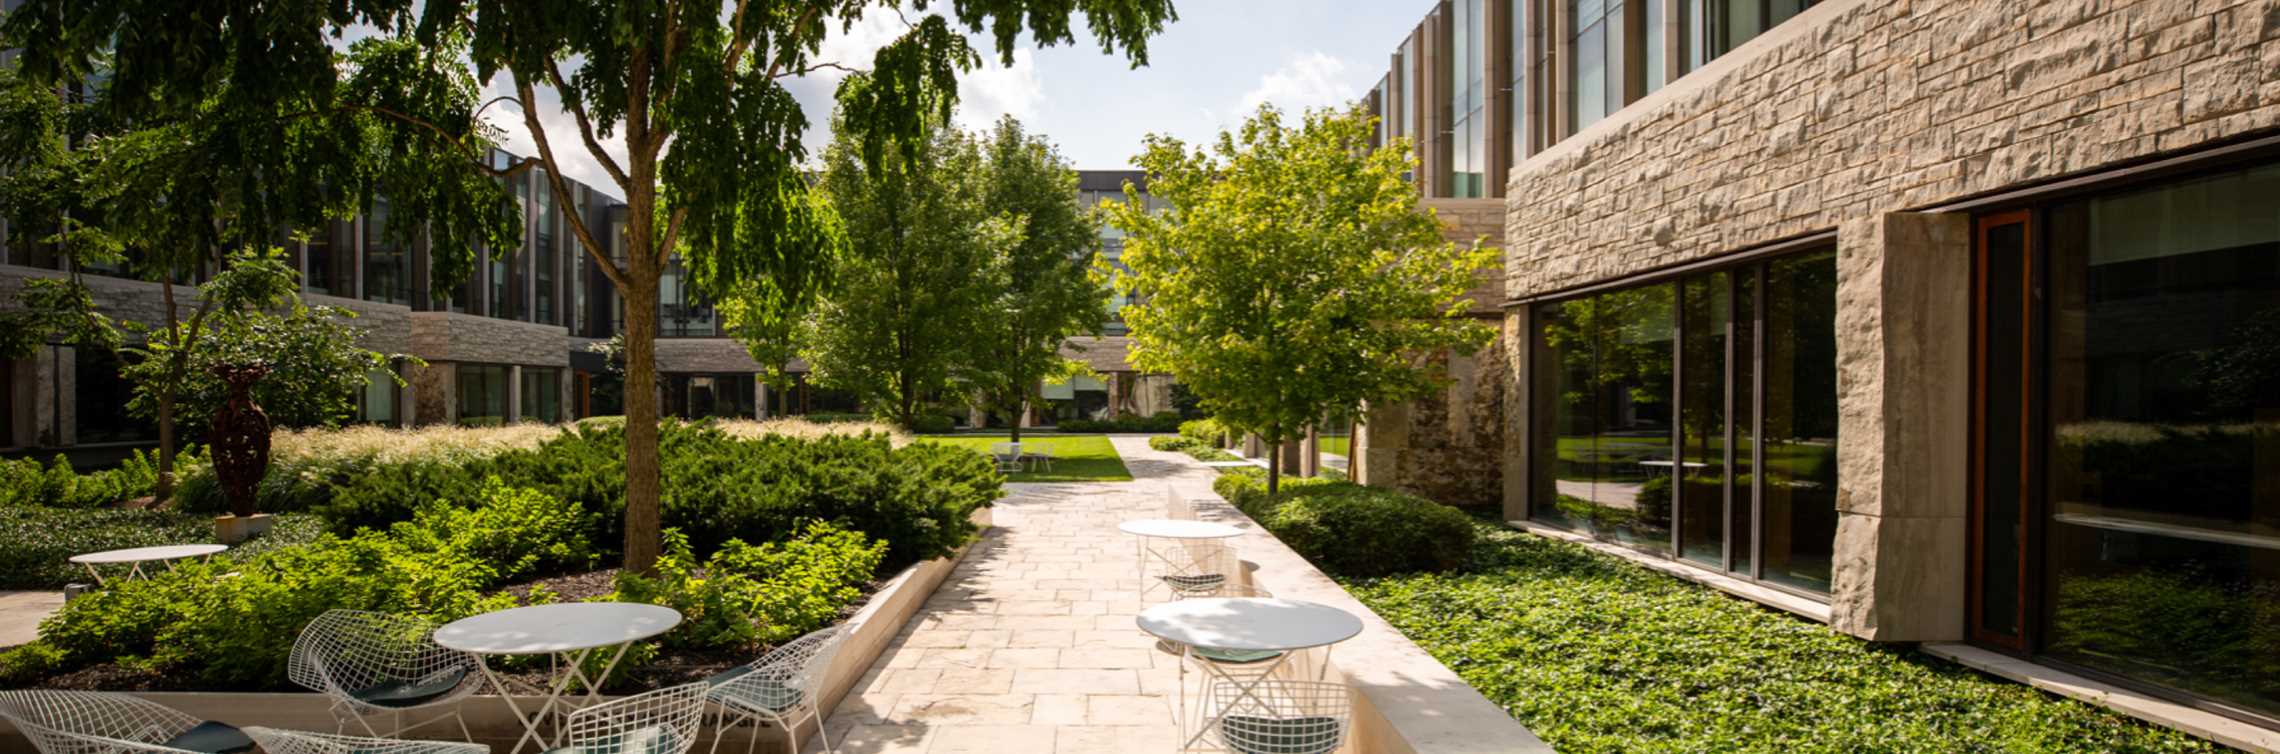 Courtyard Path at Ivey Business School